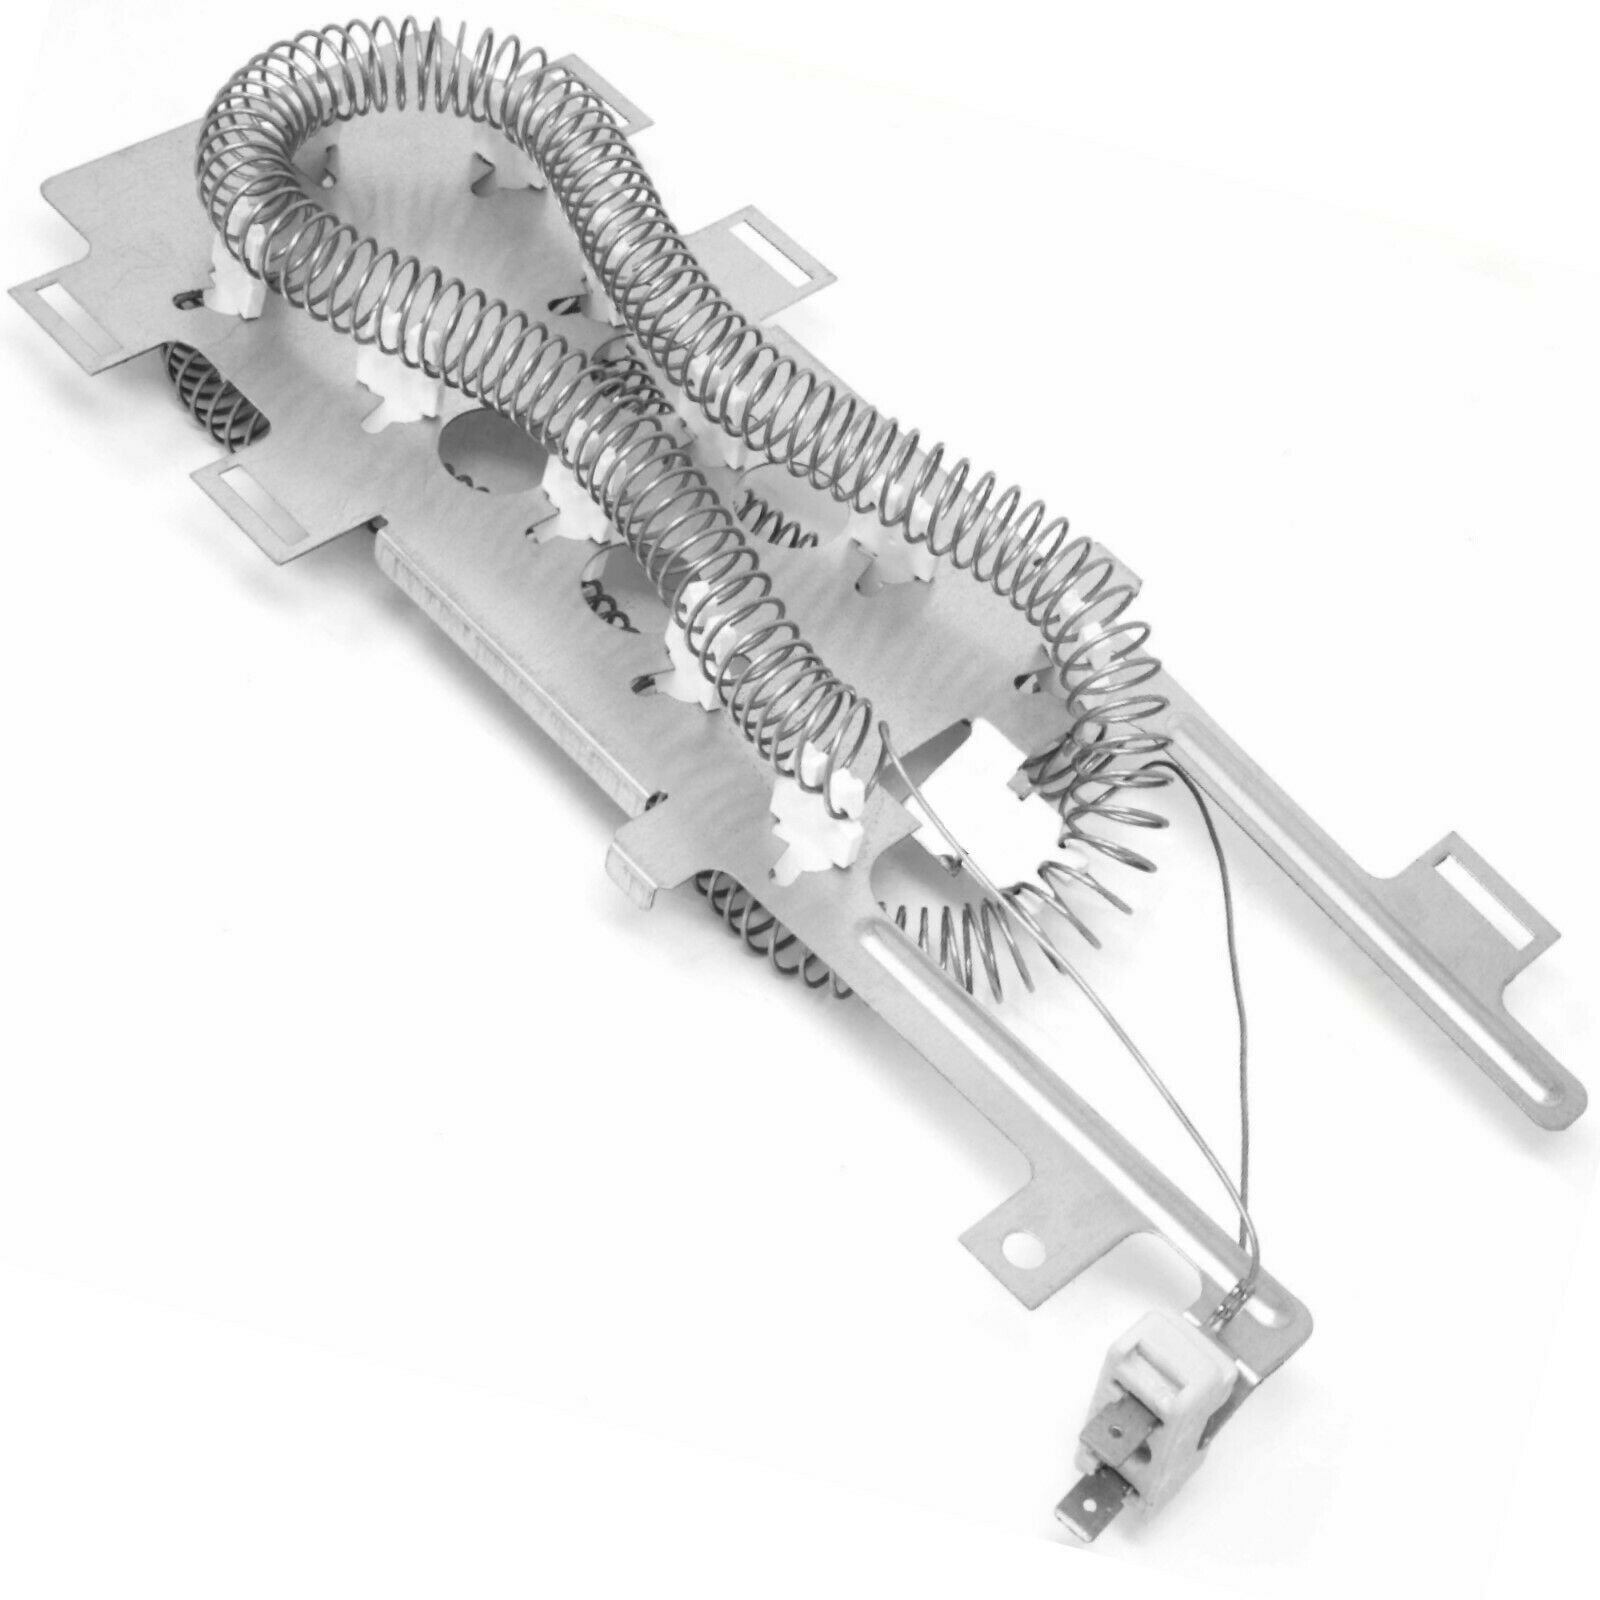 Compatible with Whirlpool and Ken-more Whirl-pool Dryer Beaquicy 8544771 Dryer Heating Element 